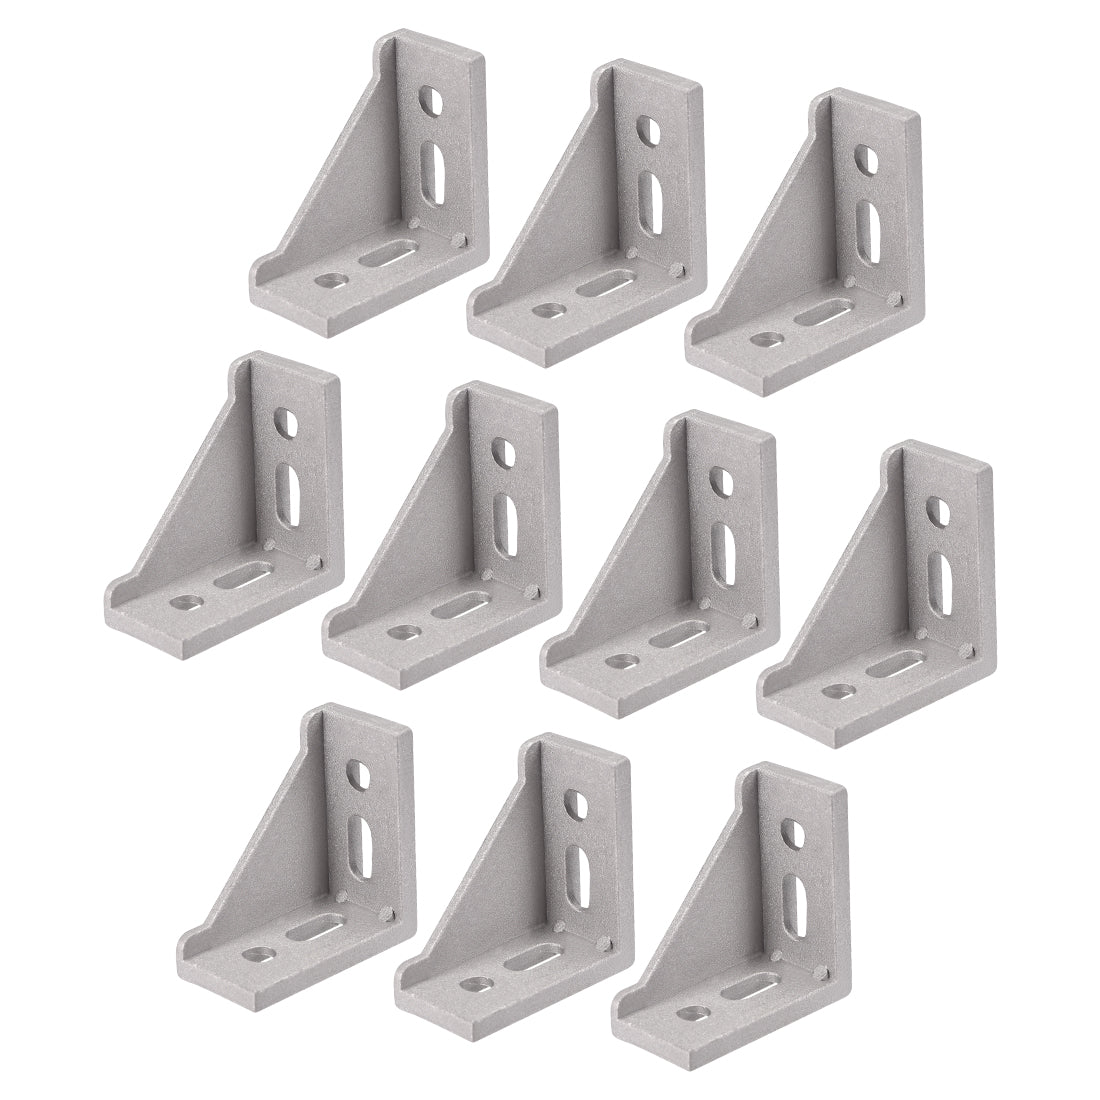 uxcell Uxcell Inside Corner Bracket Gusset, 60mm x 60mm for 3030 Series Aluminum Extrusion Profile with Slot 8mm, 10 Pcs (Silver)